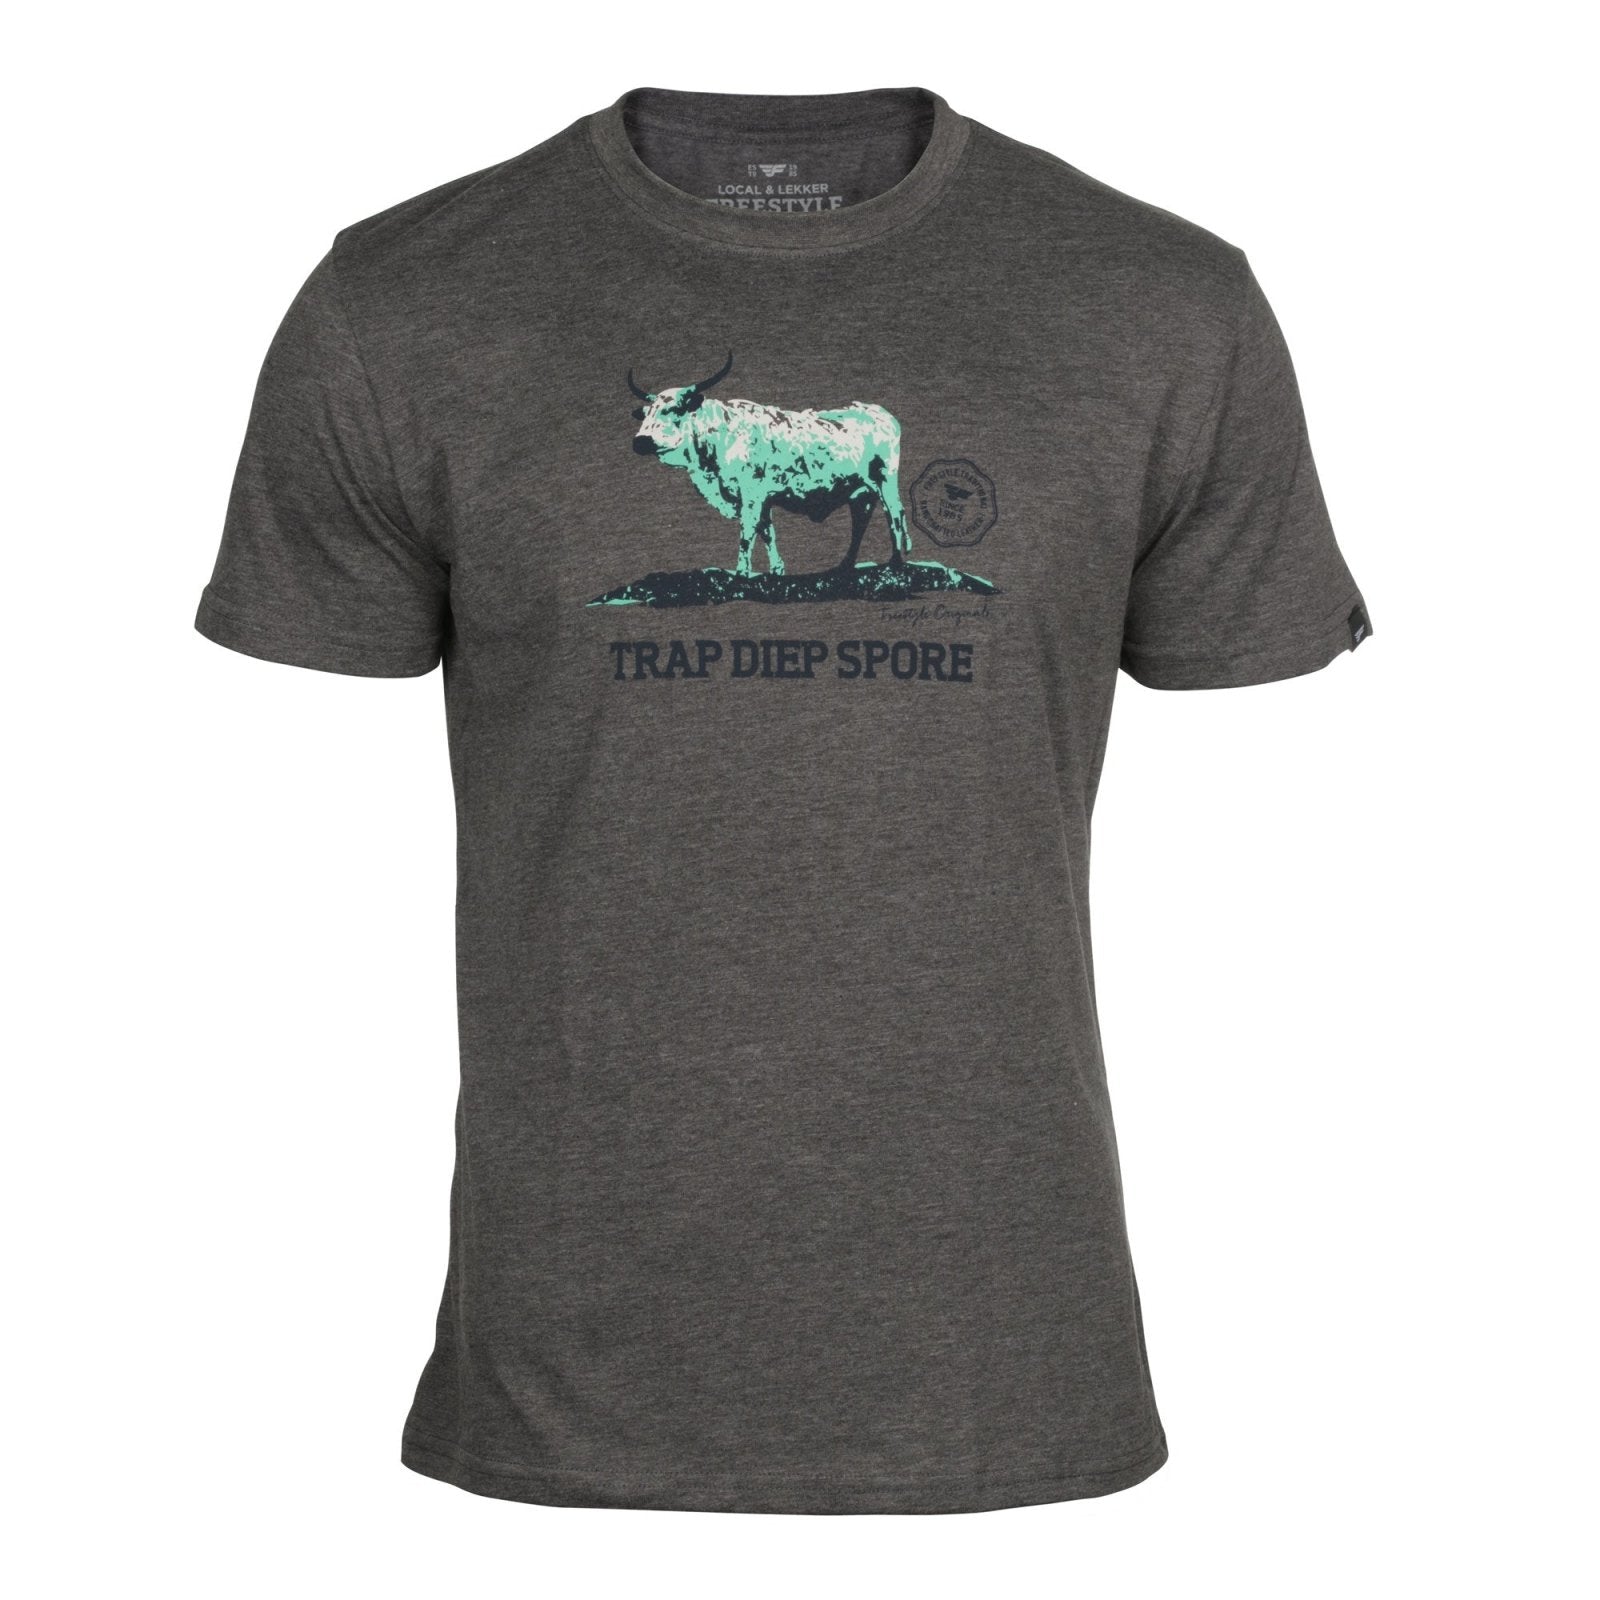 Tee Grey Melange with Fluorescent Green Nguni Bull T-Shirt - Freestyle SA Proudly local leather boots veldskoens vellies leather shoes suede veldskoens